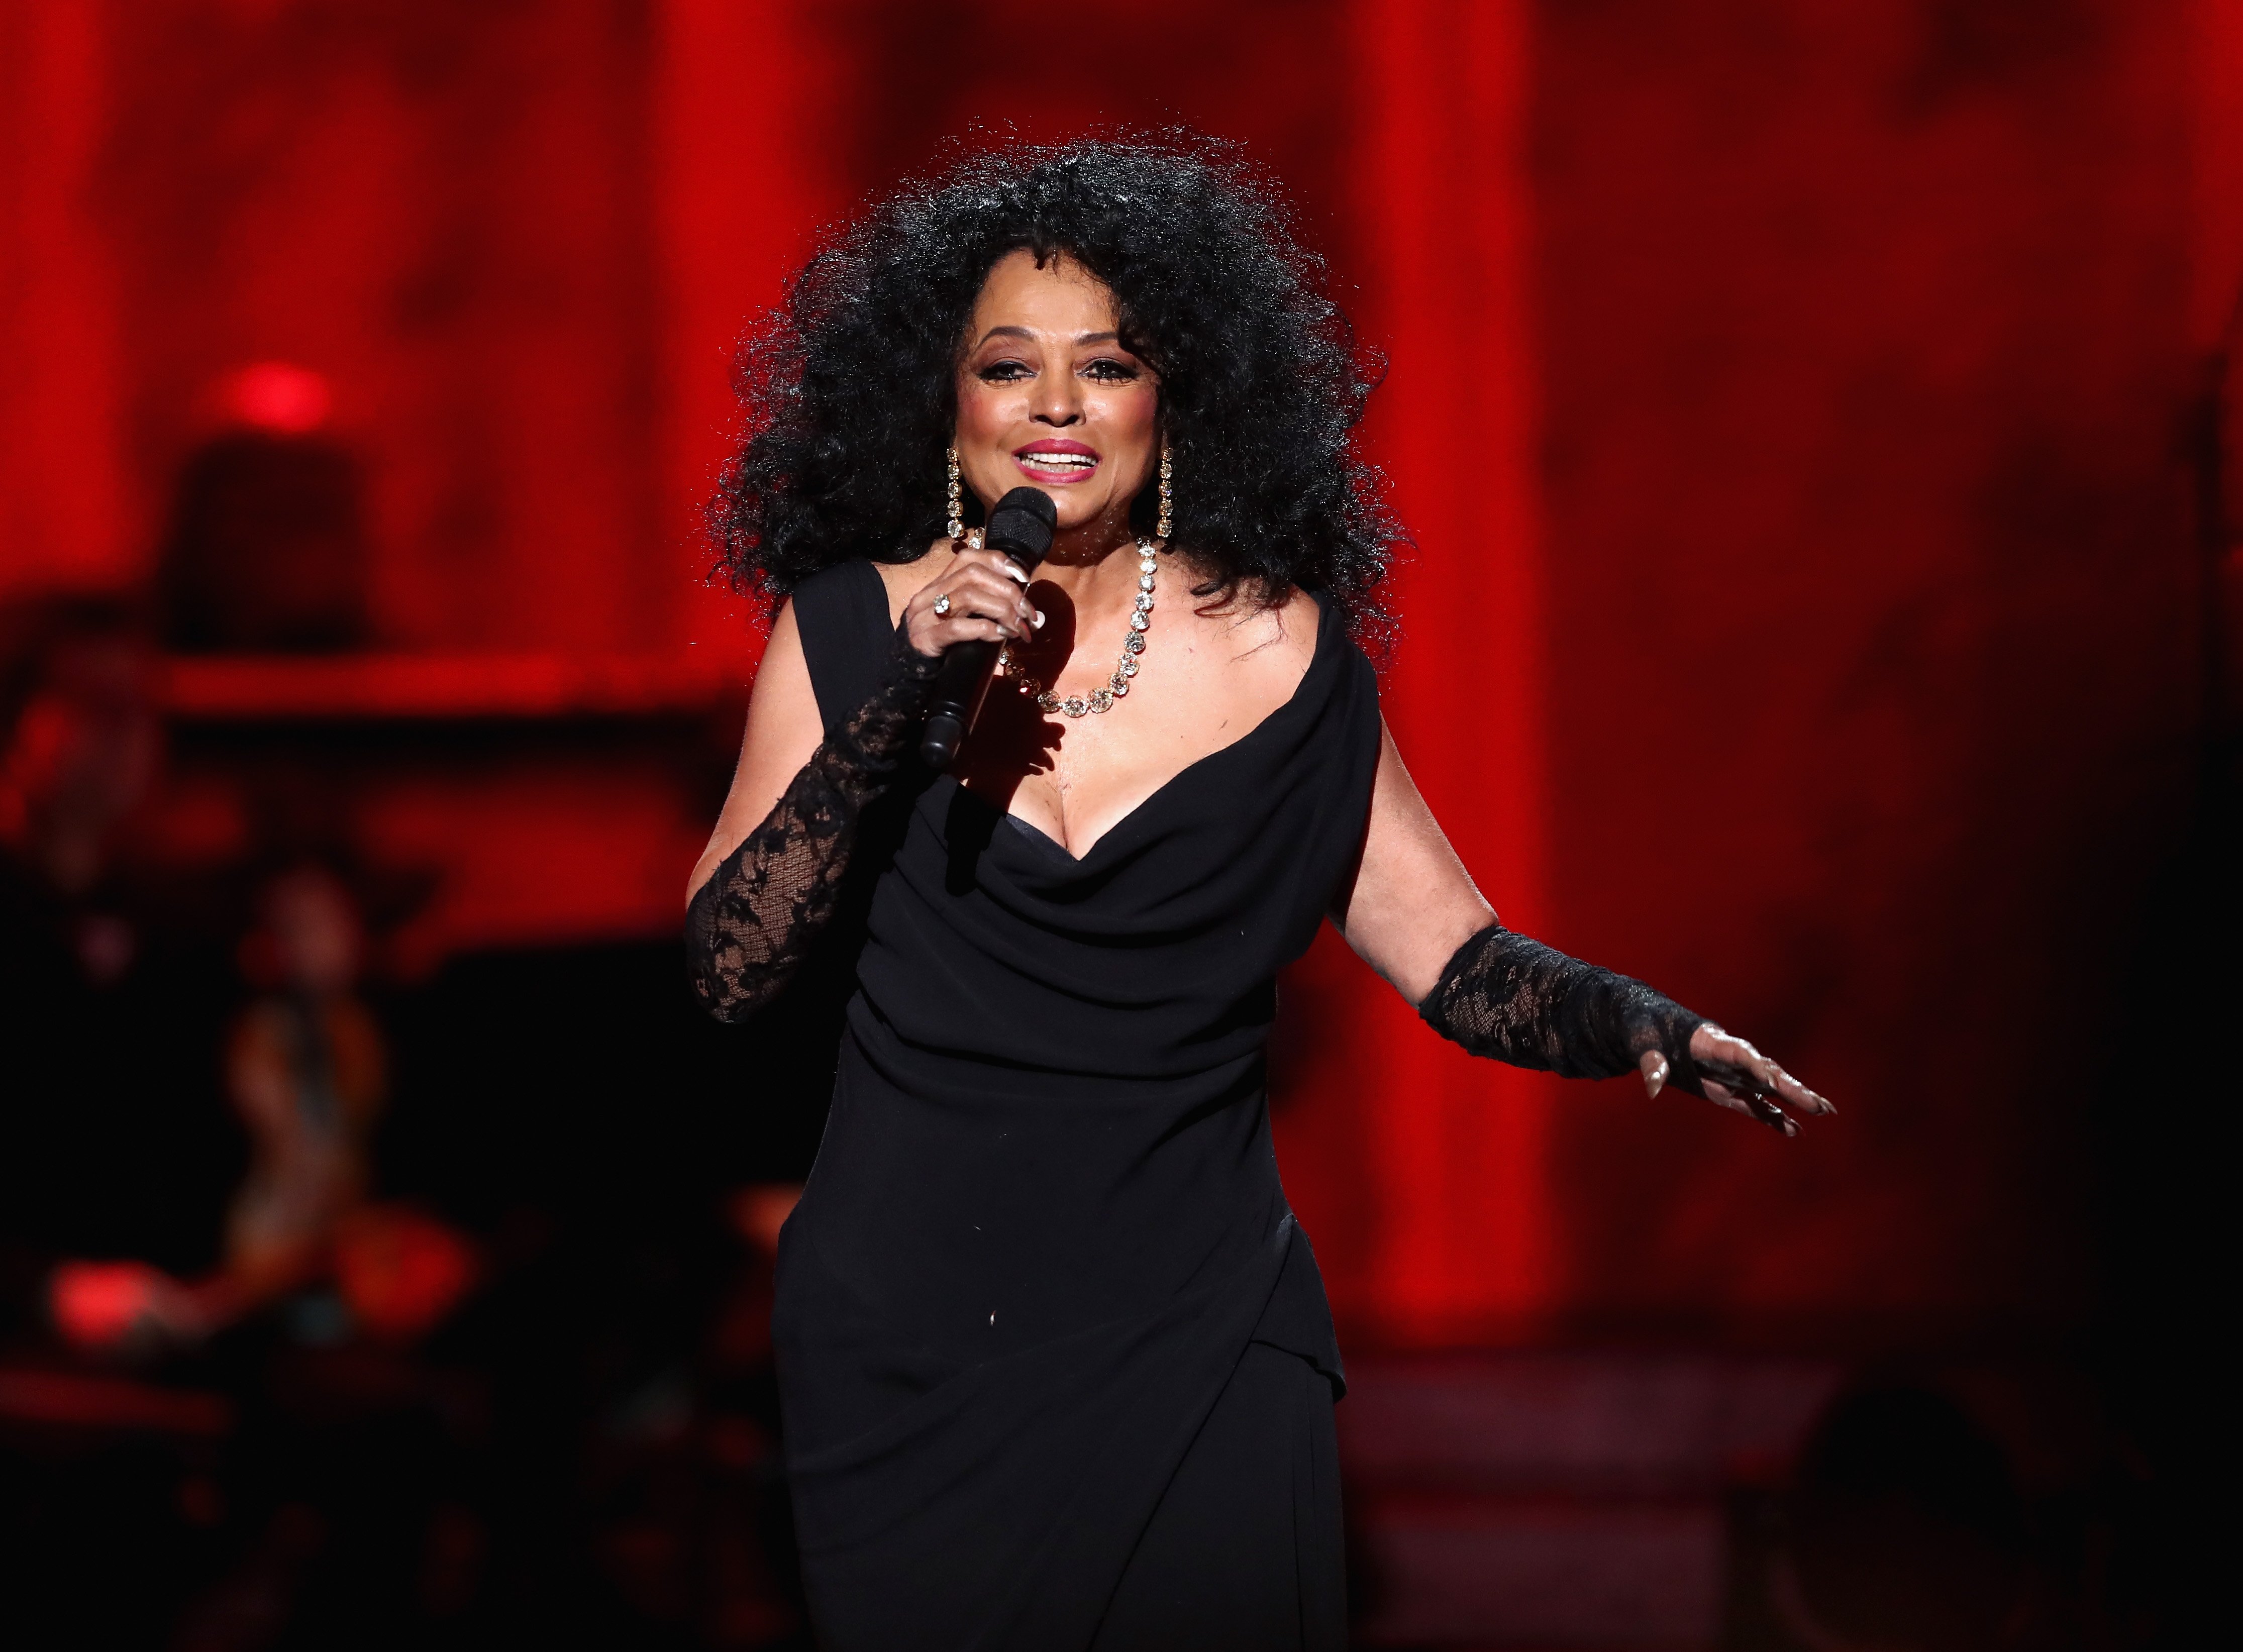 Diana Ross performs onstage during Motown 60: A GRAMMY Celebration at Microsoft Theater on February 12, 2019, in Los Angeles, California. | Source: Getty Images.